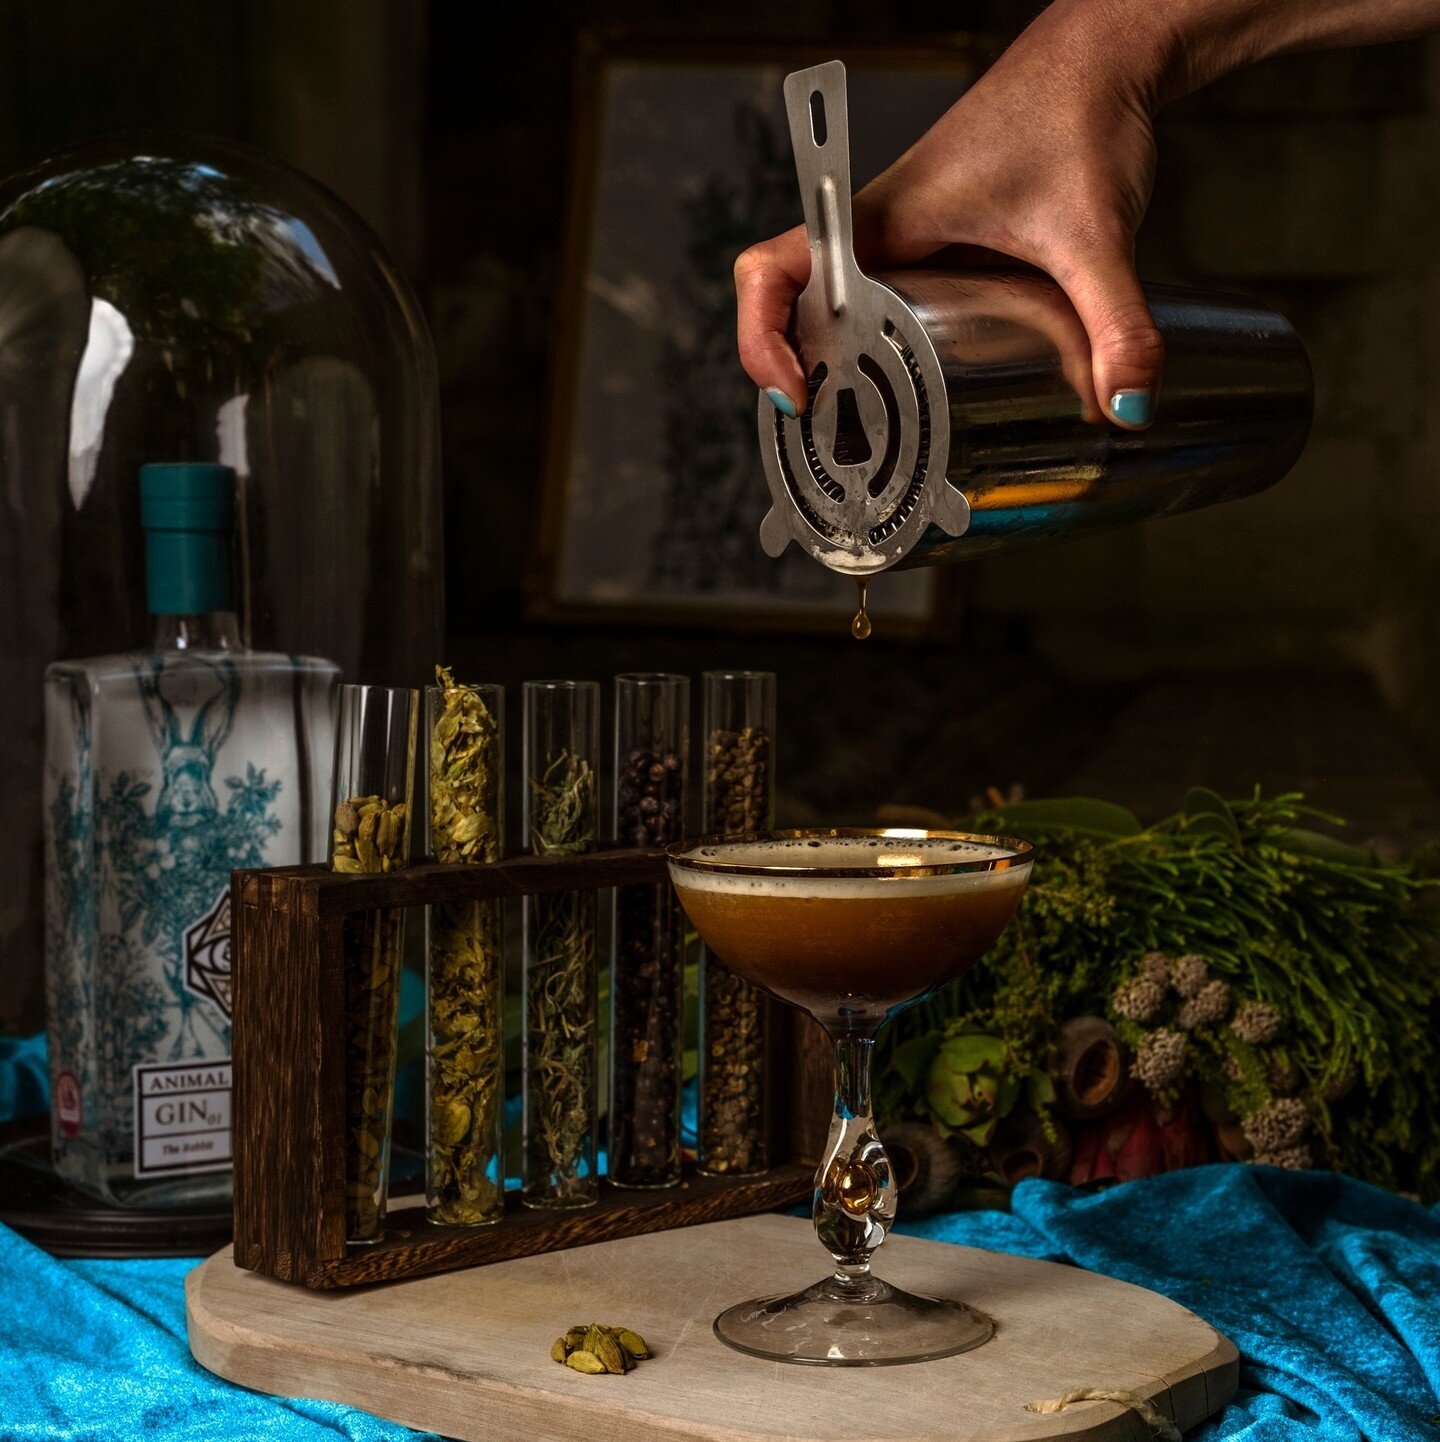 ENERGISING ESPRESSO MARTINI ⁠
⁠
Happy Thursday, folks! Did you know #TheRabbitGin is BEAUTIFUL an espresso martini? The cardamom, mint and the subtly sweet corn spirit in our gin complement the coffee flavours gorgeously on the nose and palate, while